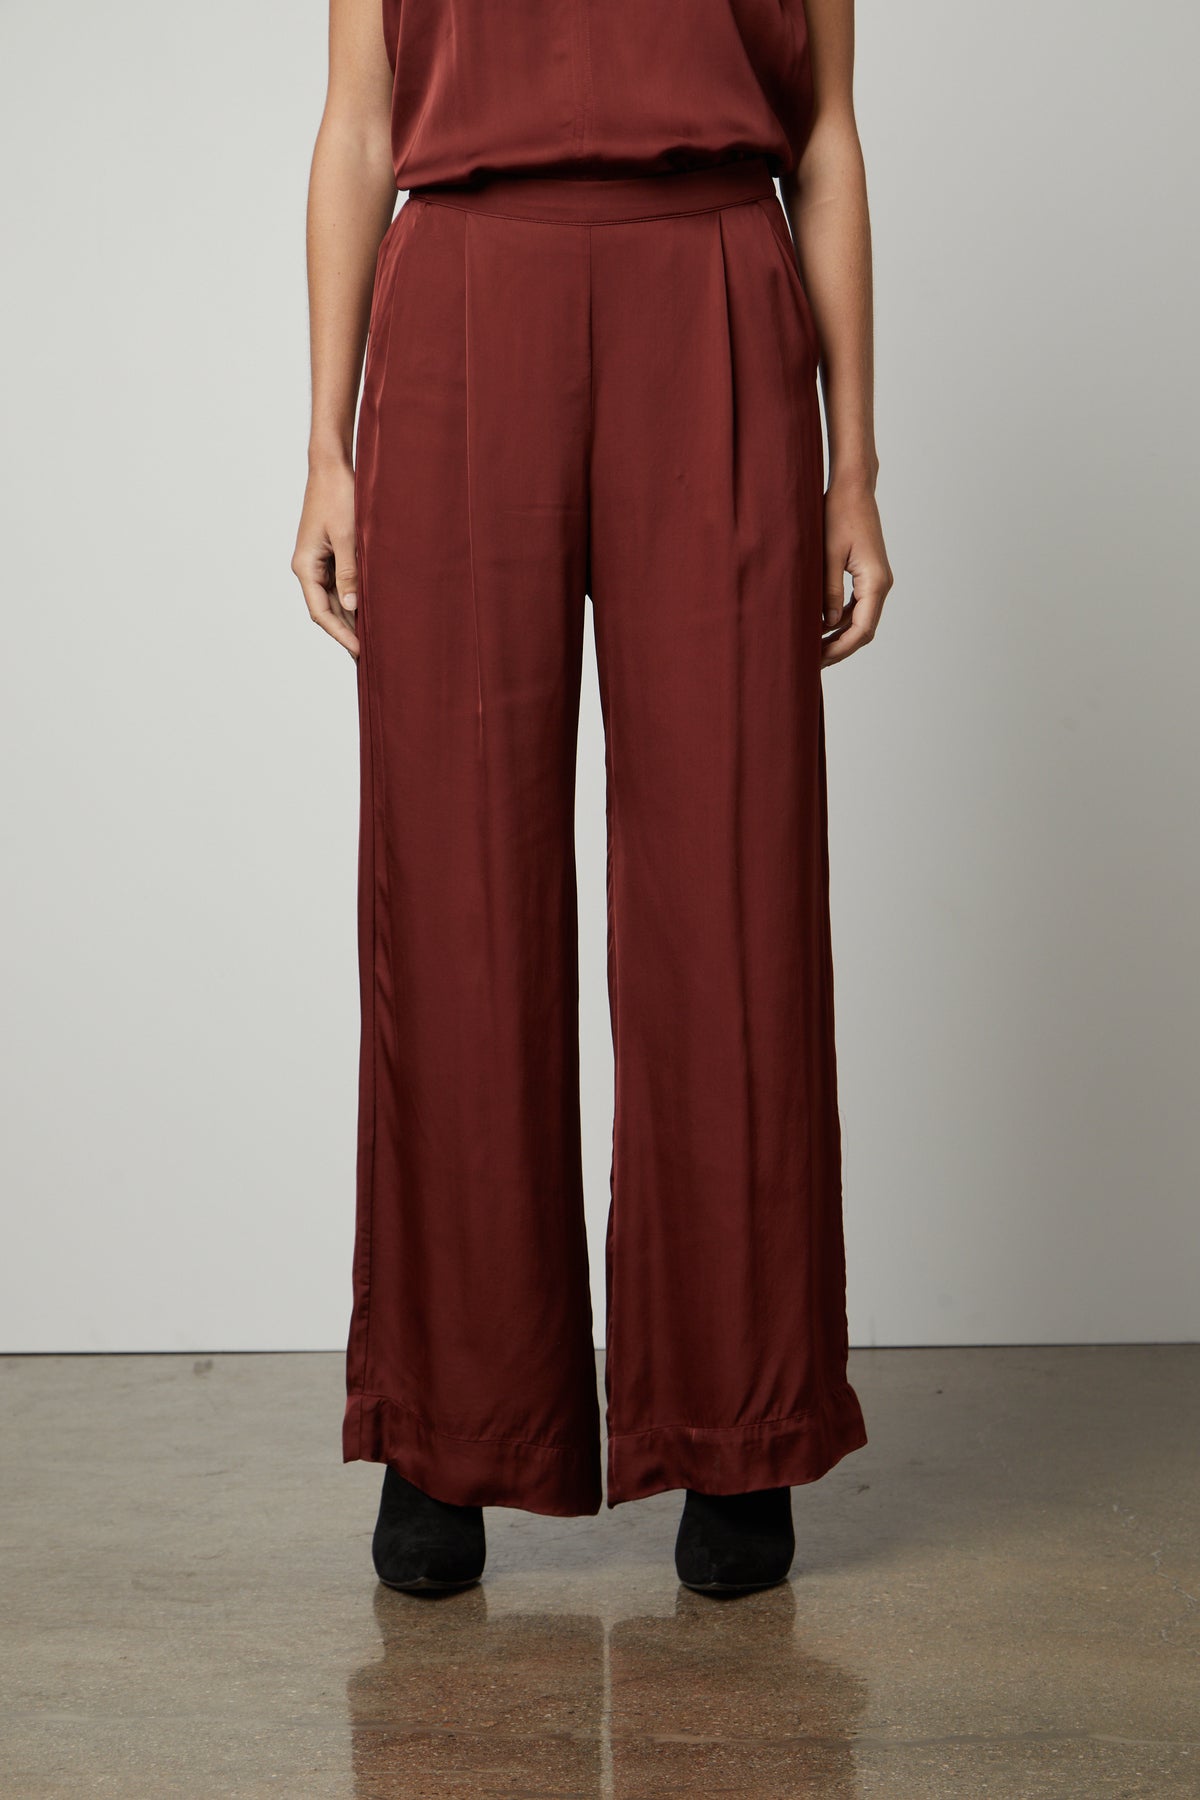 A woman wearing a Velvet by Graham & Spencer LIVI SATIN VISCOSE WIDE LEG PANT with an elastic waistline and slash pockets.-35655937786049